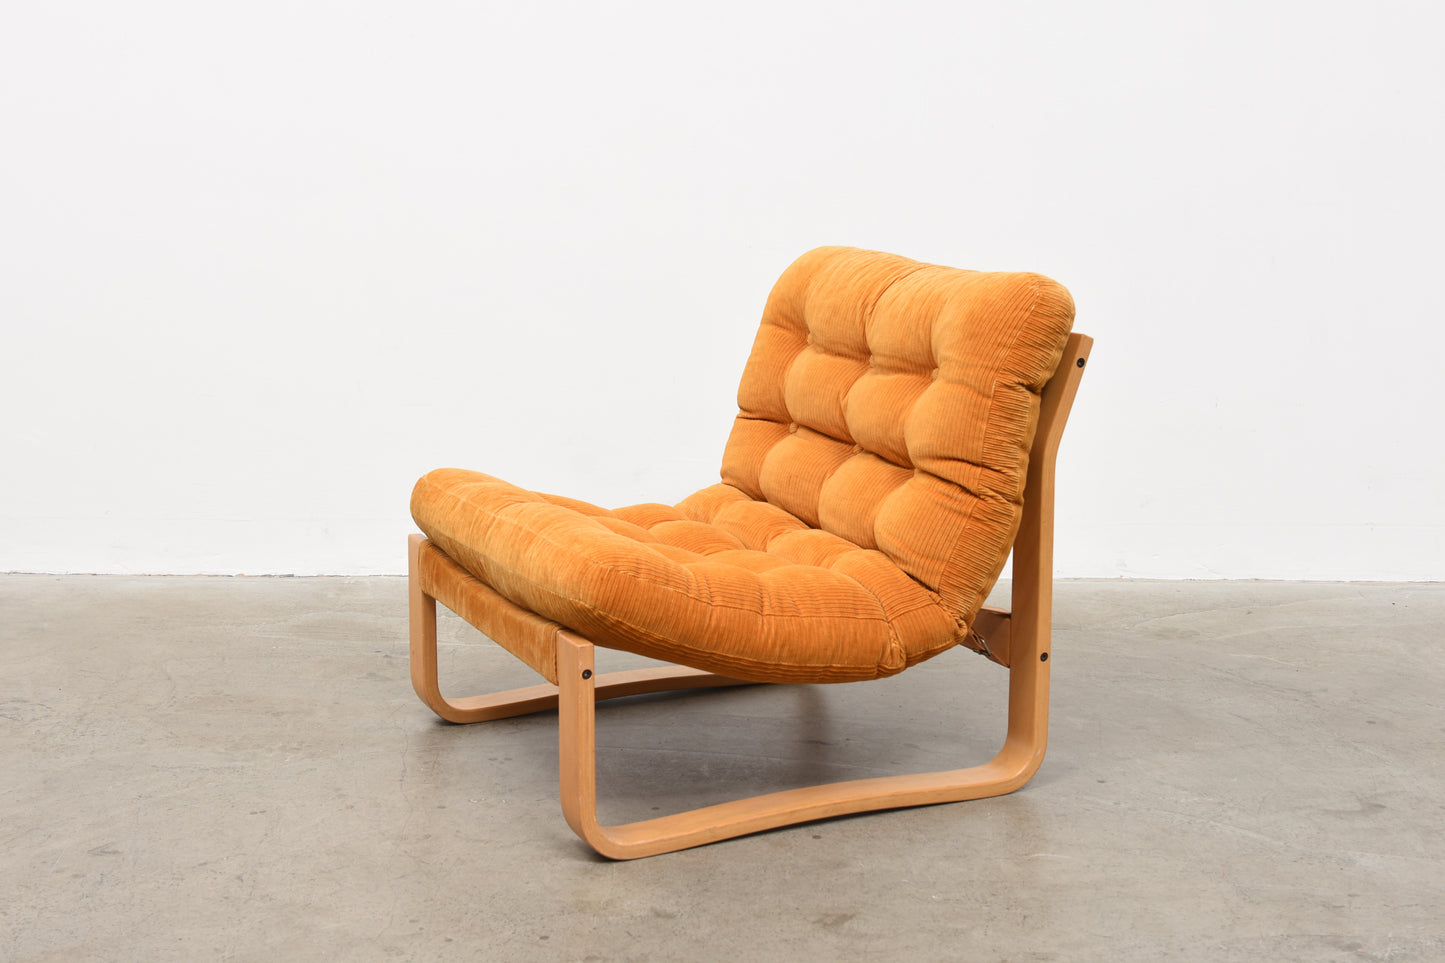 1980s lounger by Swed-Form